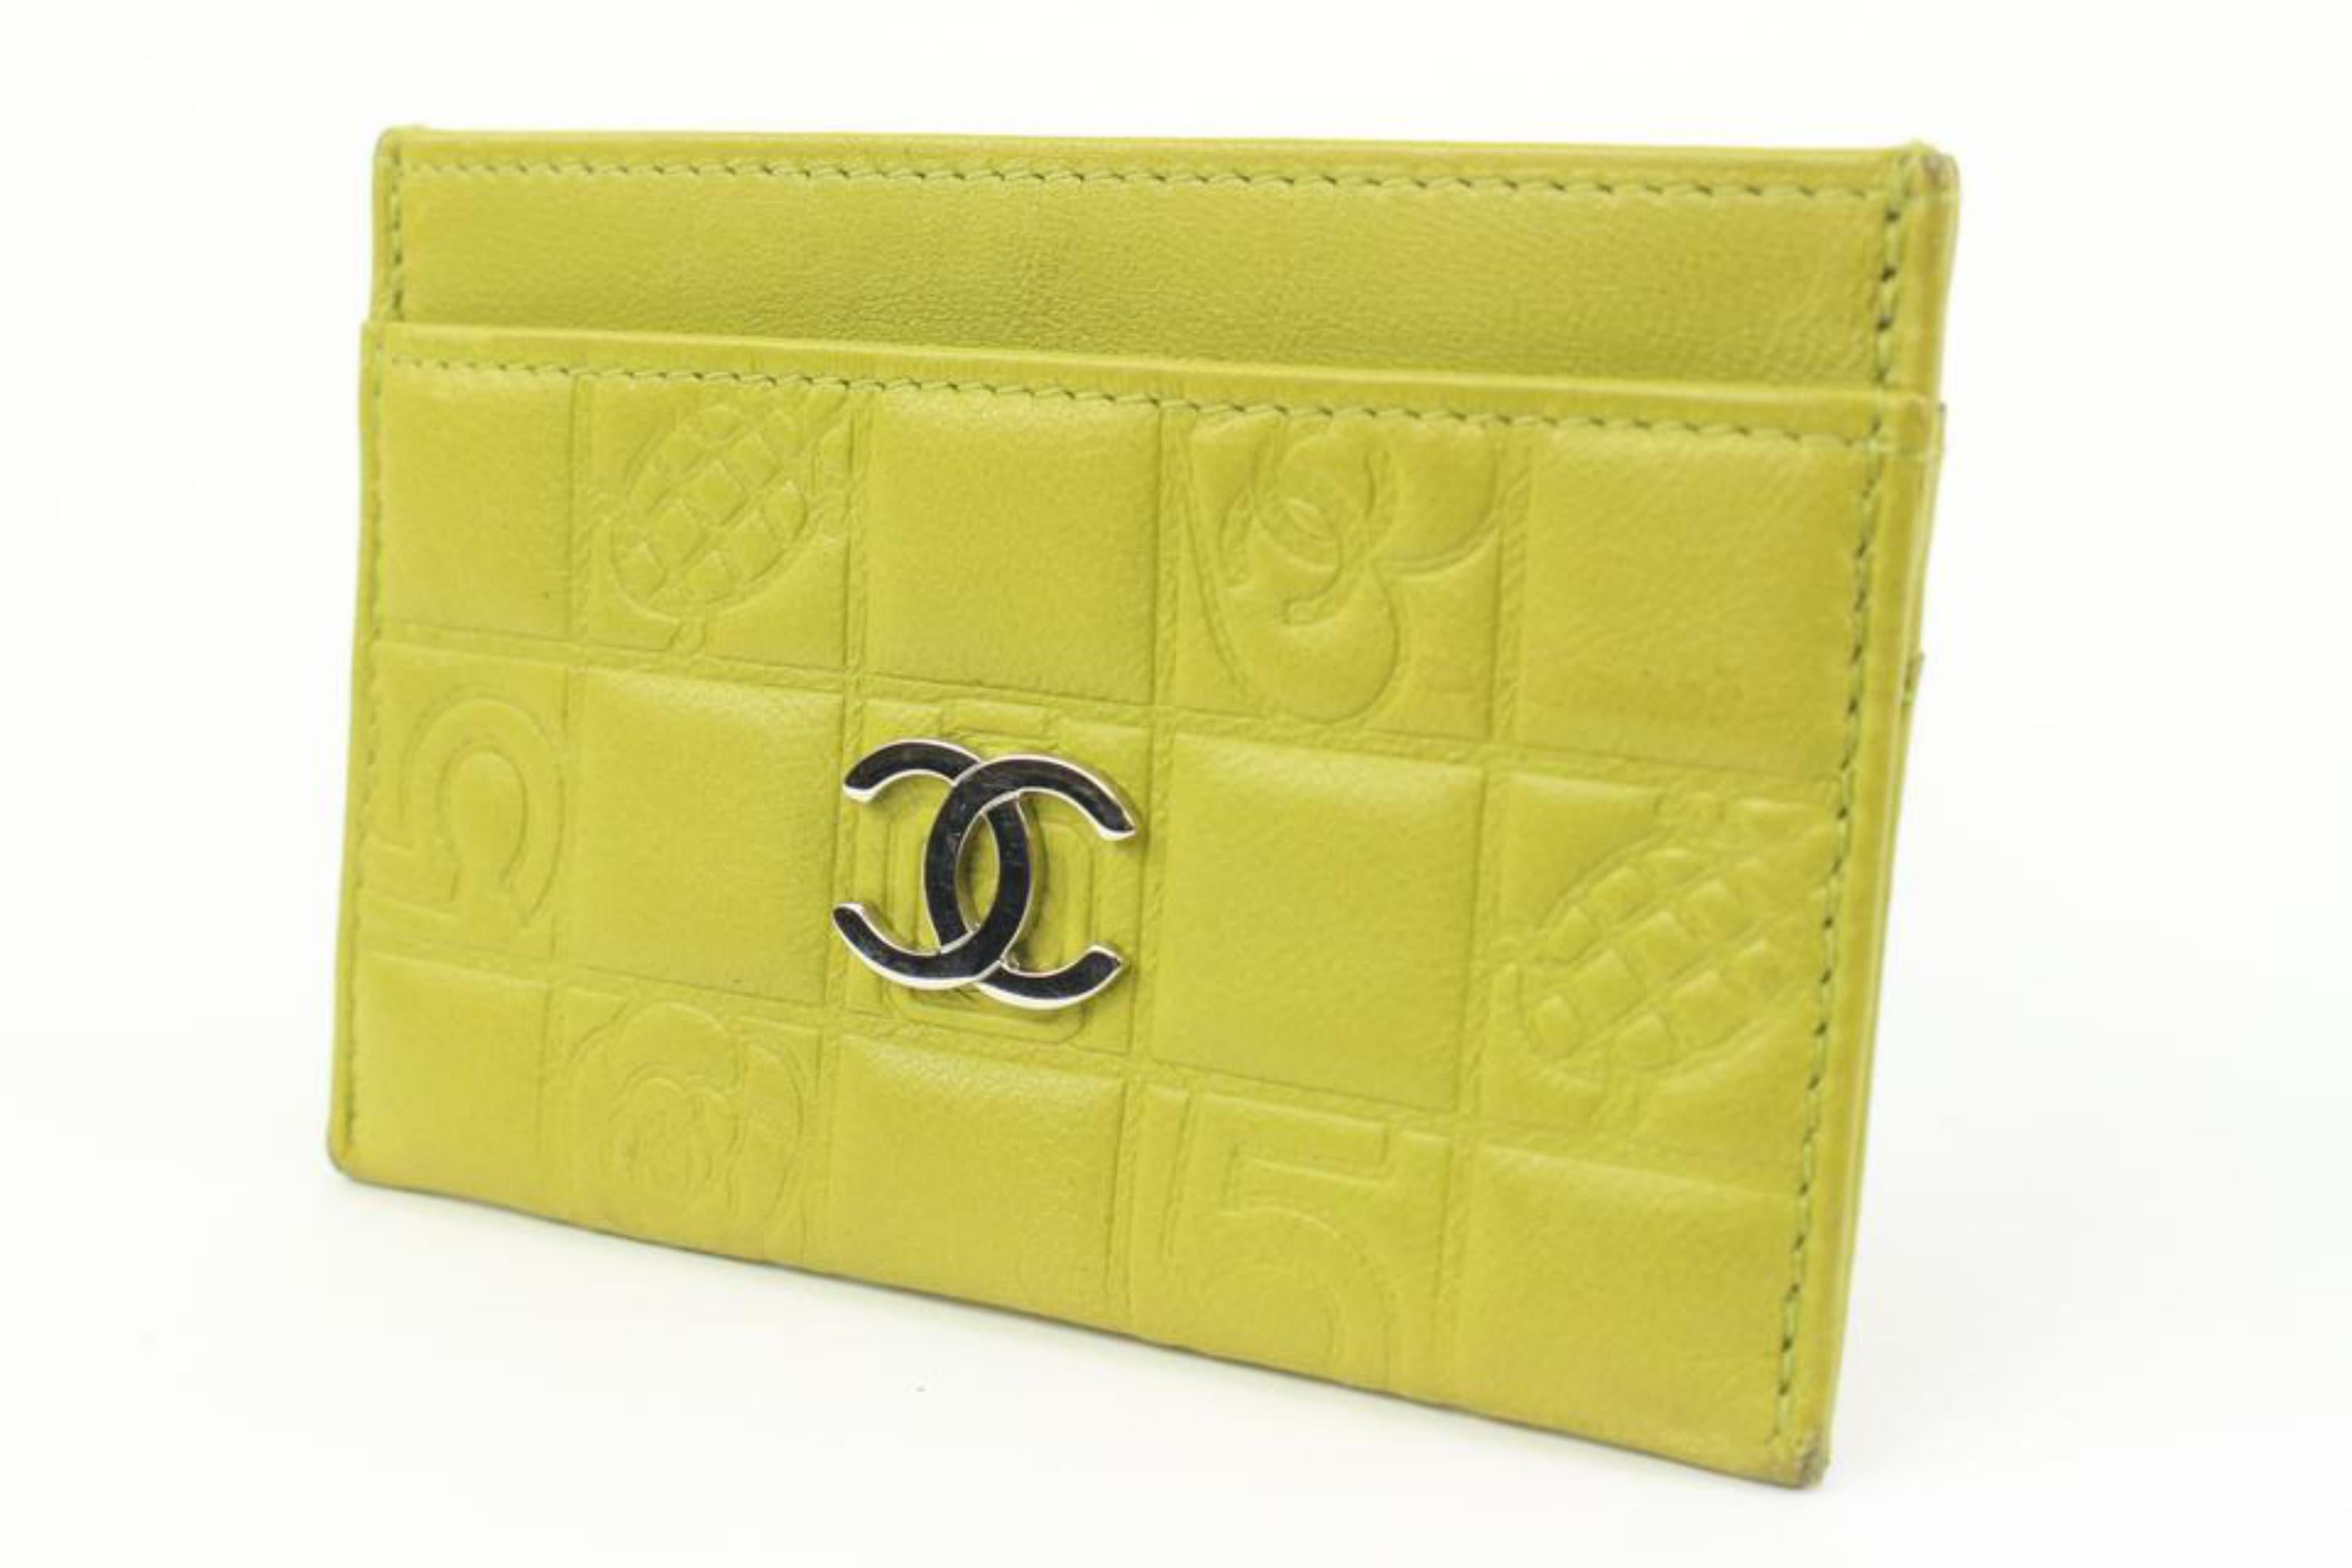 Chanel Lime Green Quilted Chocolate Bar Card Holder Wallet Case 52ck322s In Good Condition For Sale In Dix hills, NY